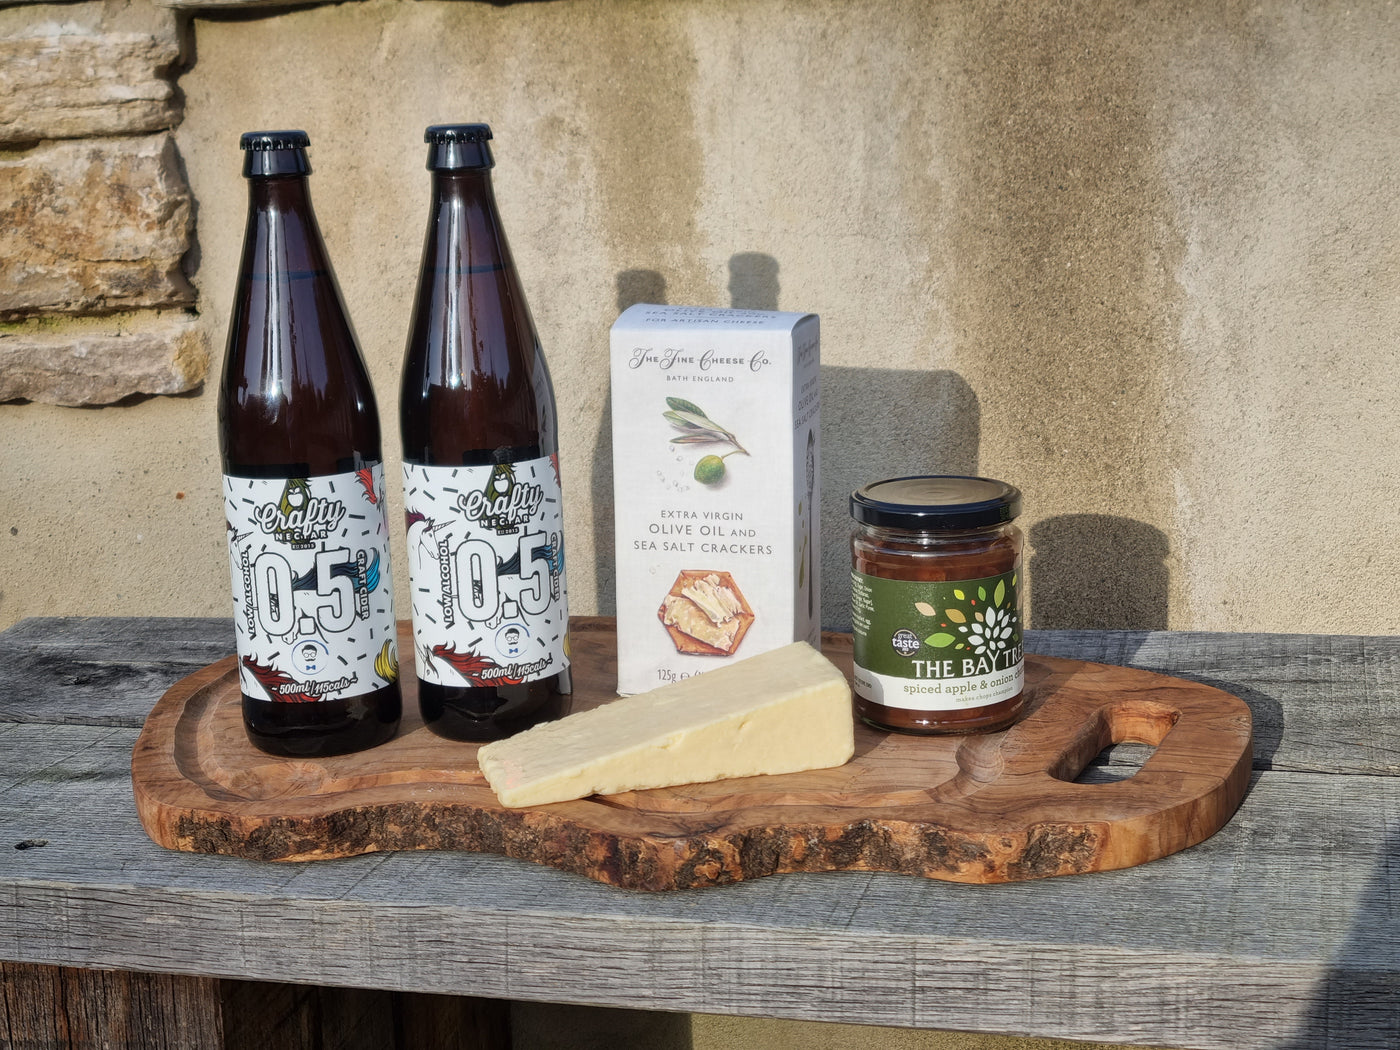 Alcohol Free Cider and Cheese Box